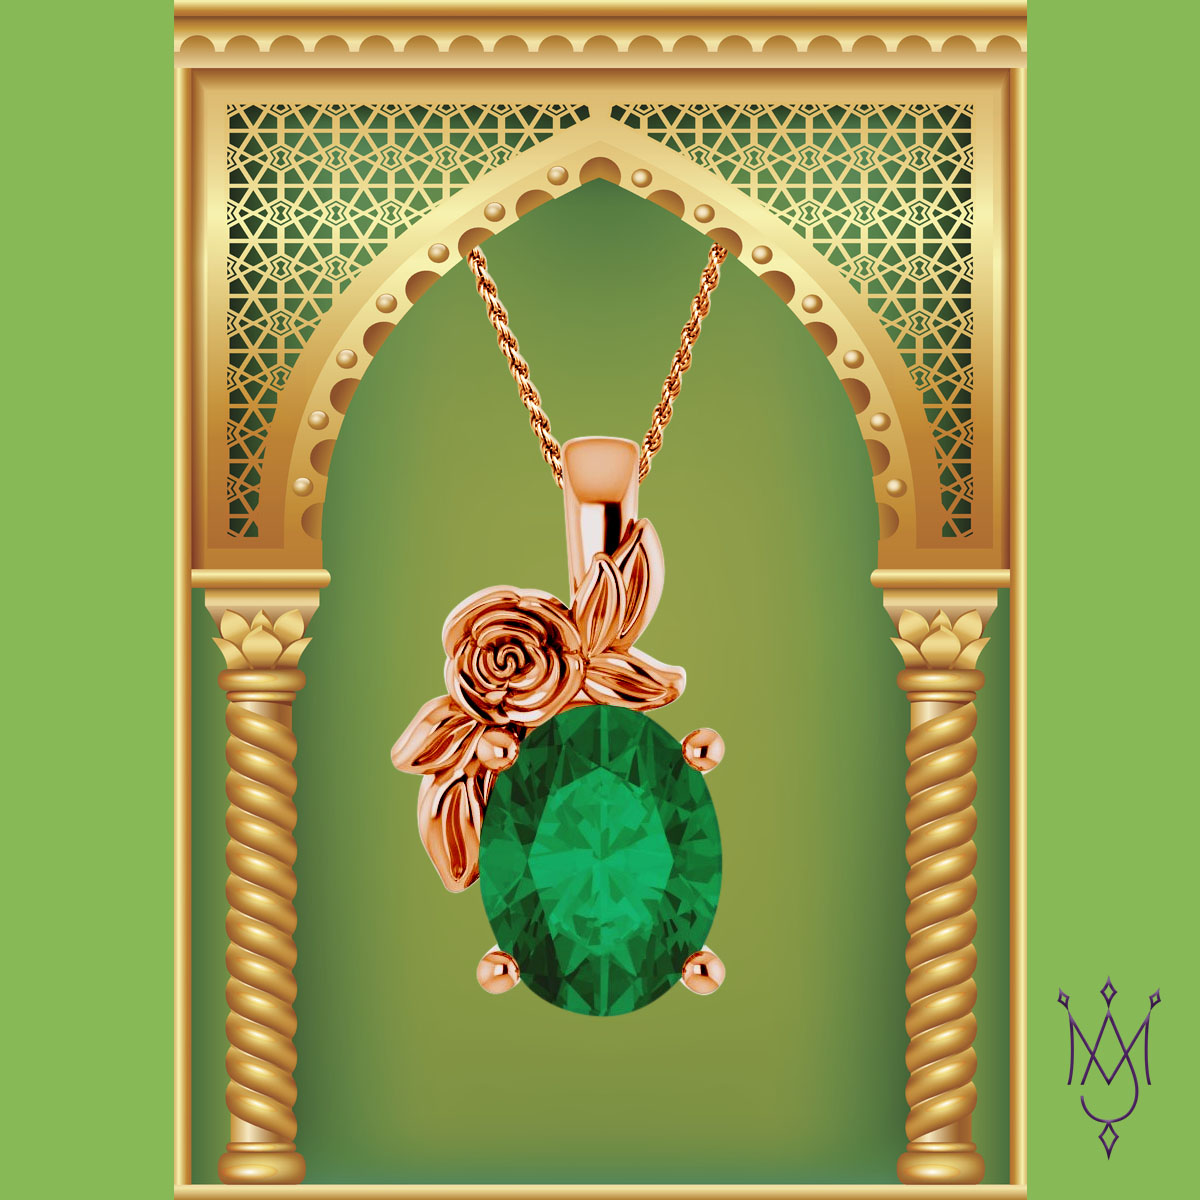 Emerald is the King of Beryl, this season Emeralds are blooming in the Monarchy! Our May birthstone jewelry will light up a smile on anyone's face.
#MonarchyJewels #EmeraldJewelry #BirthstoneJewelry #Emerald #Birthstone